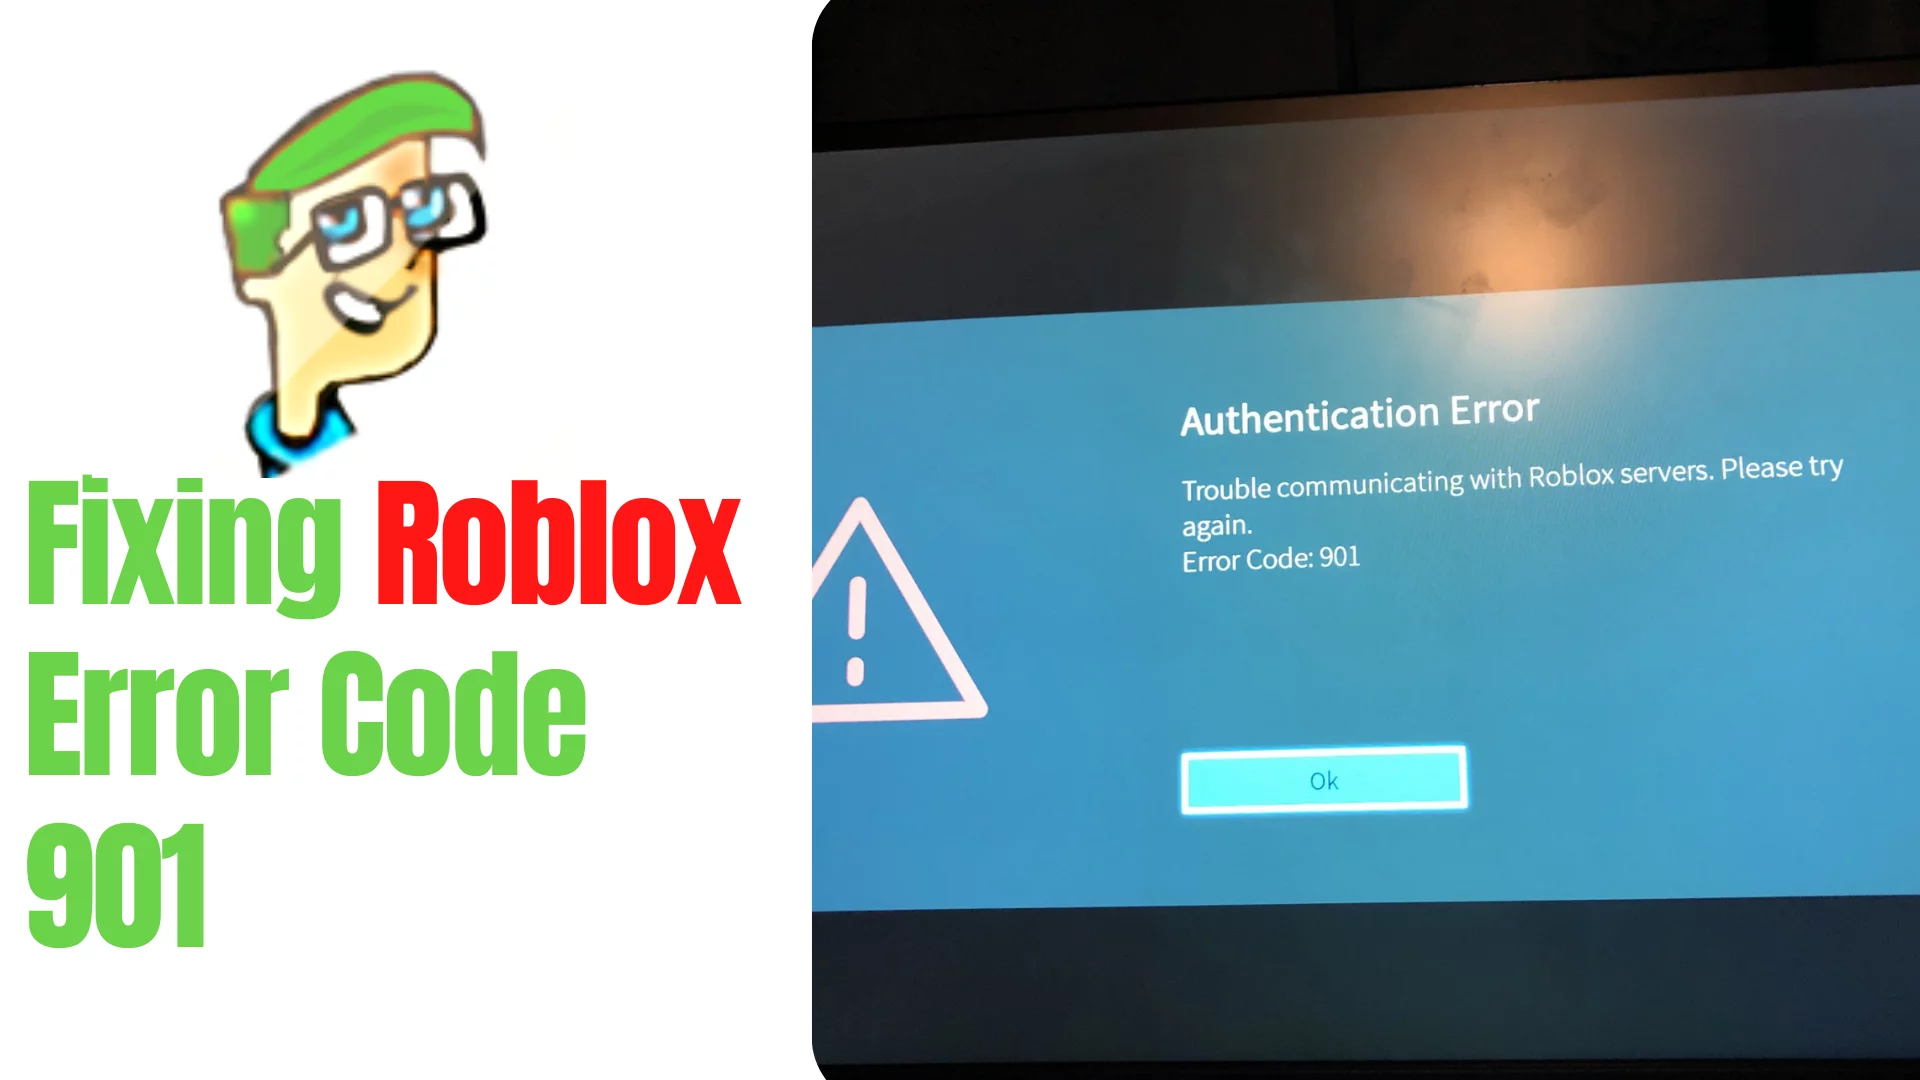 How To Unlink Xbox Account from Roblox (Very Easy!) 